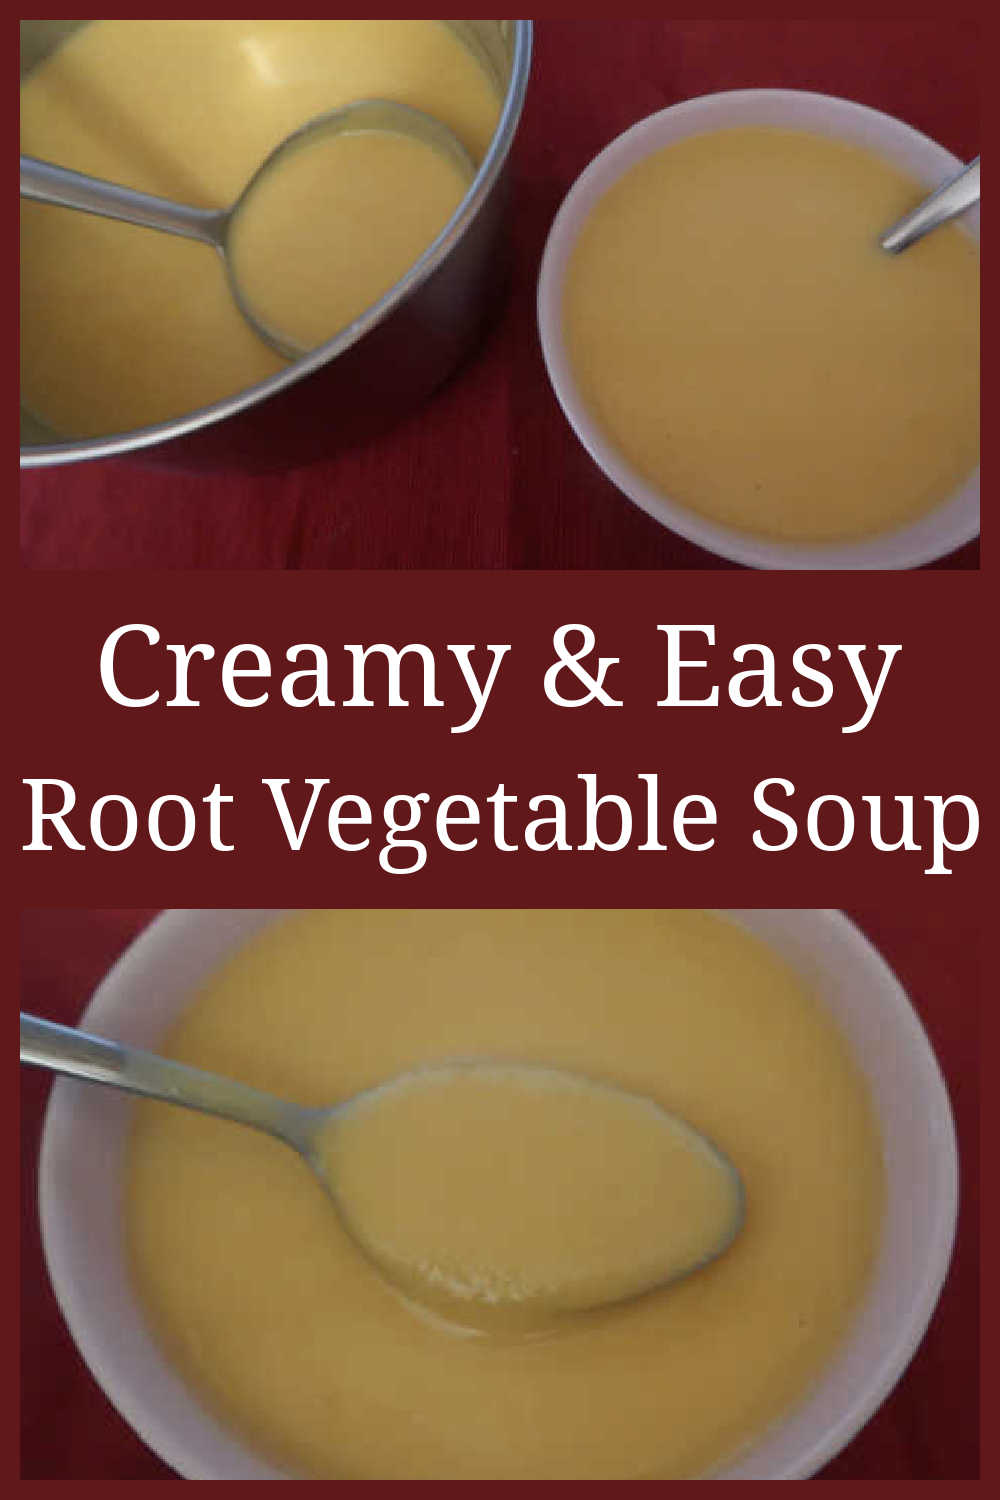 Root Vegetable Soup Recipe - How to make the best easy, creamy vegetable broth with root veggies - a simple soup for winter months - with the video tutorial.